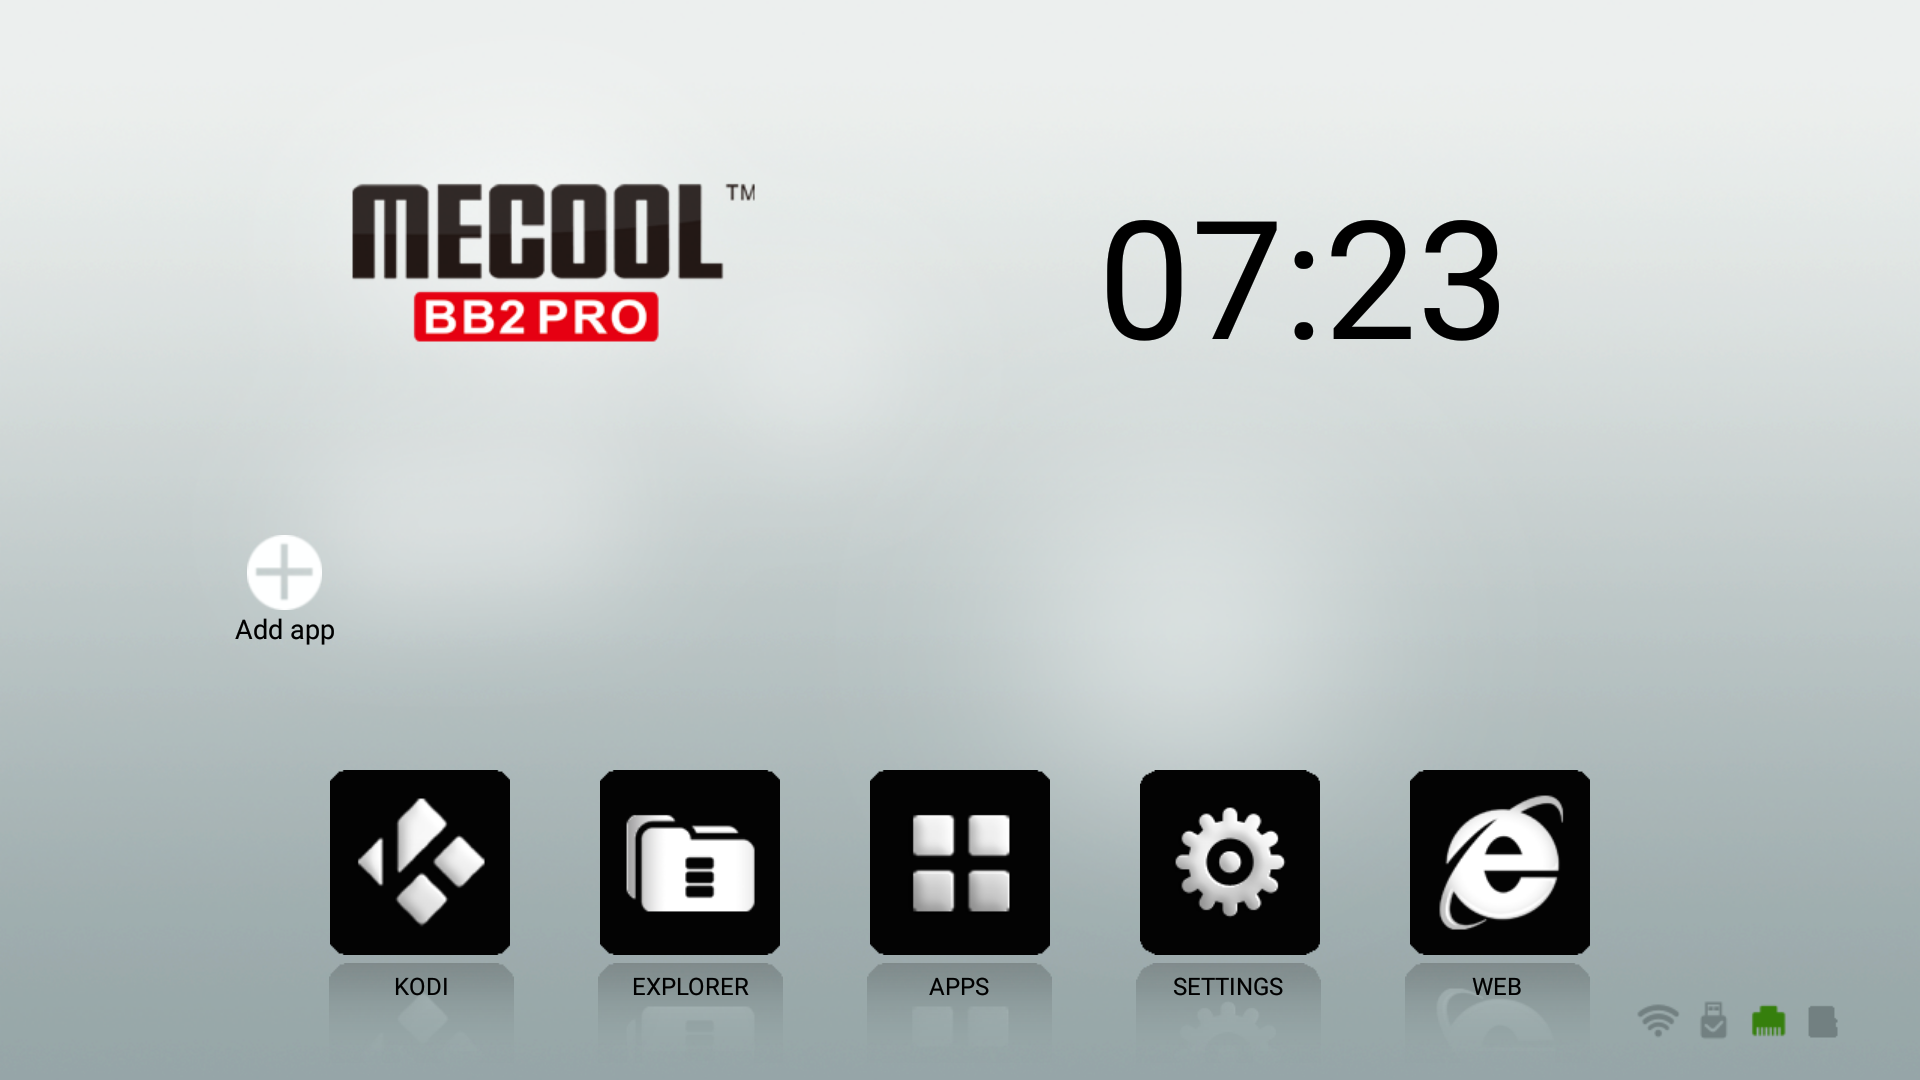 http://www.cnx-software.com/wp-content/uploads/2017/01/Mecool-BB2-Pro-Android-Launcher.png